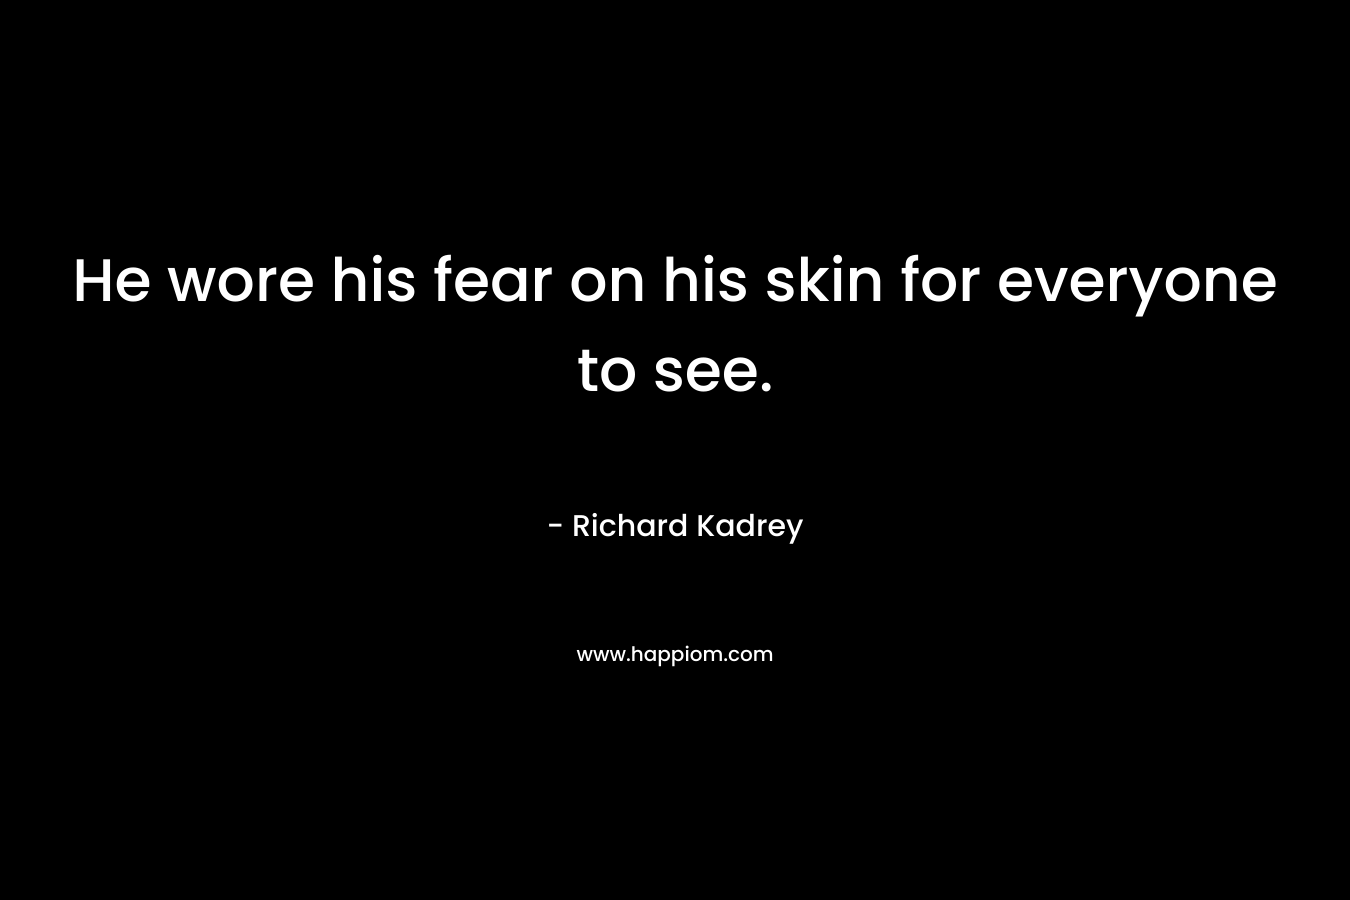 He wore his fear on his skin for everyone to see. – Richard Kadrey